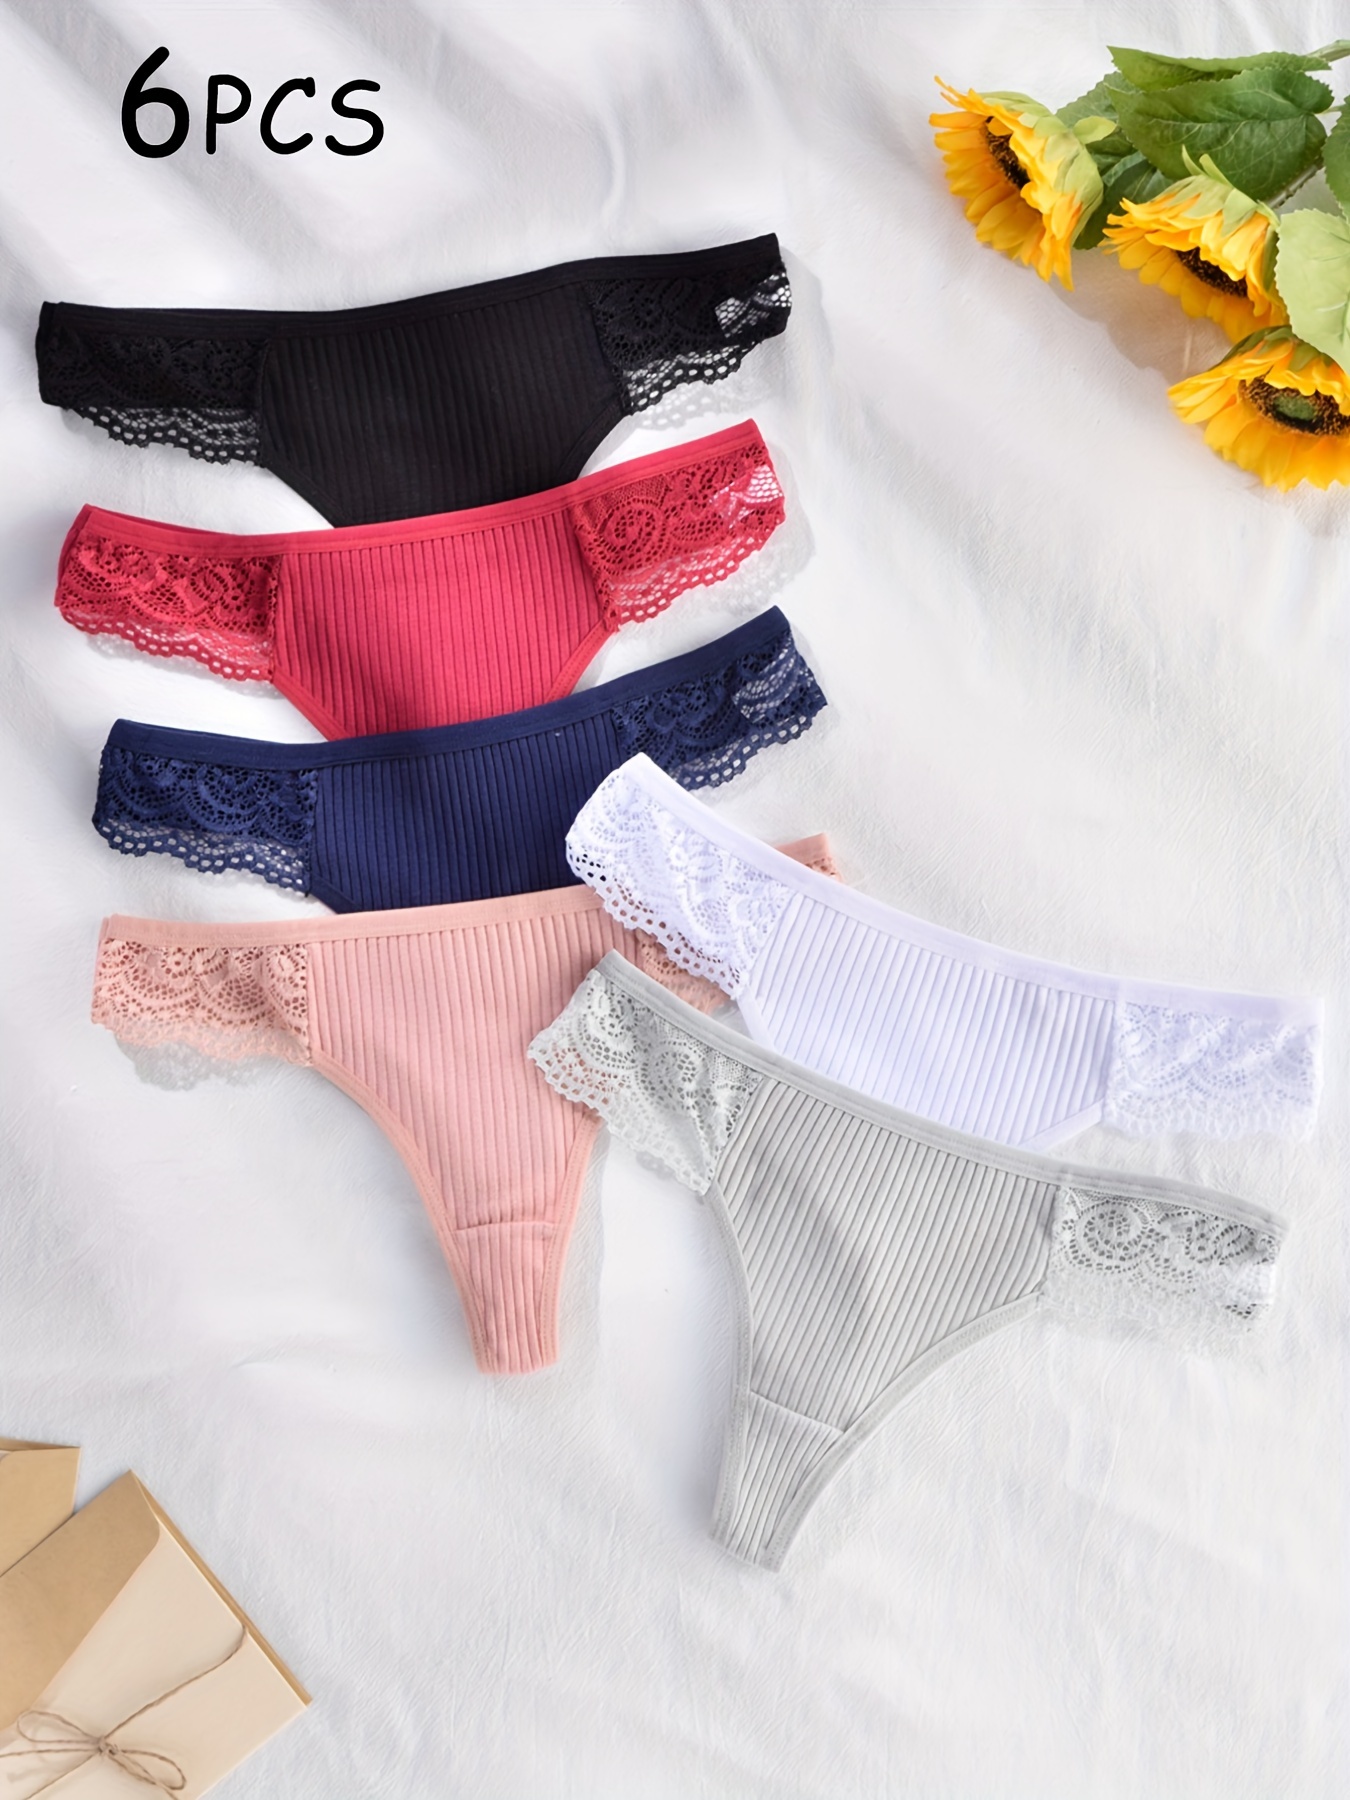 6pcs Contrast Lace Ribbed Thongs, Soft & Comfy Intimates Panties, Women's  Lingerie & Underwear